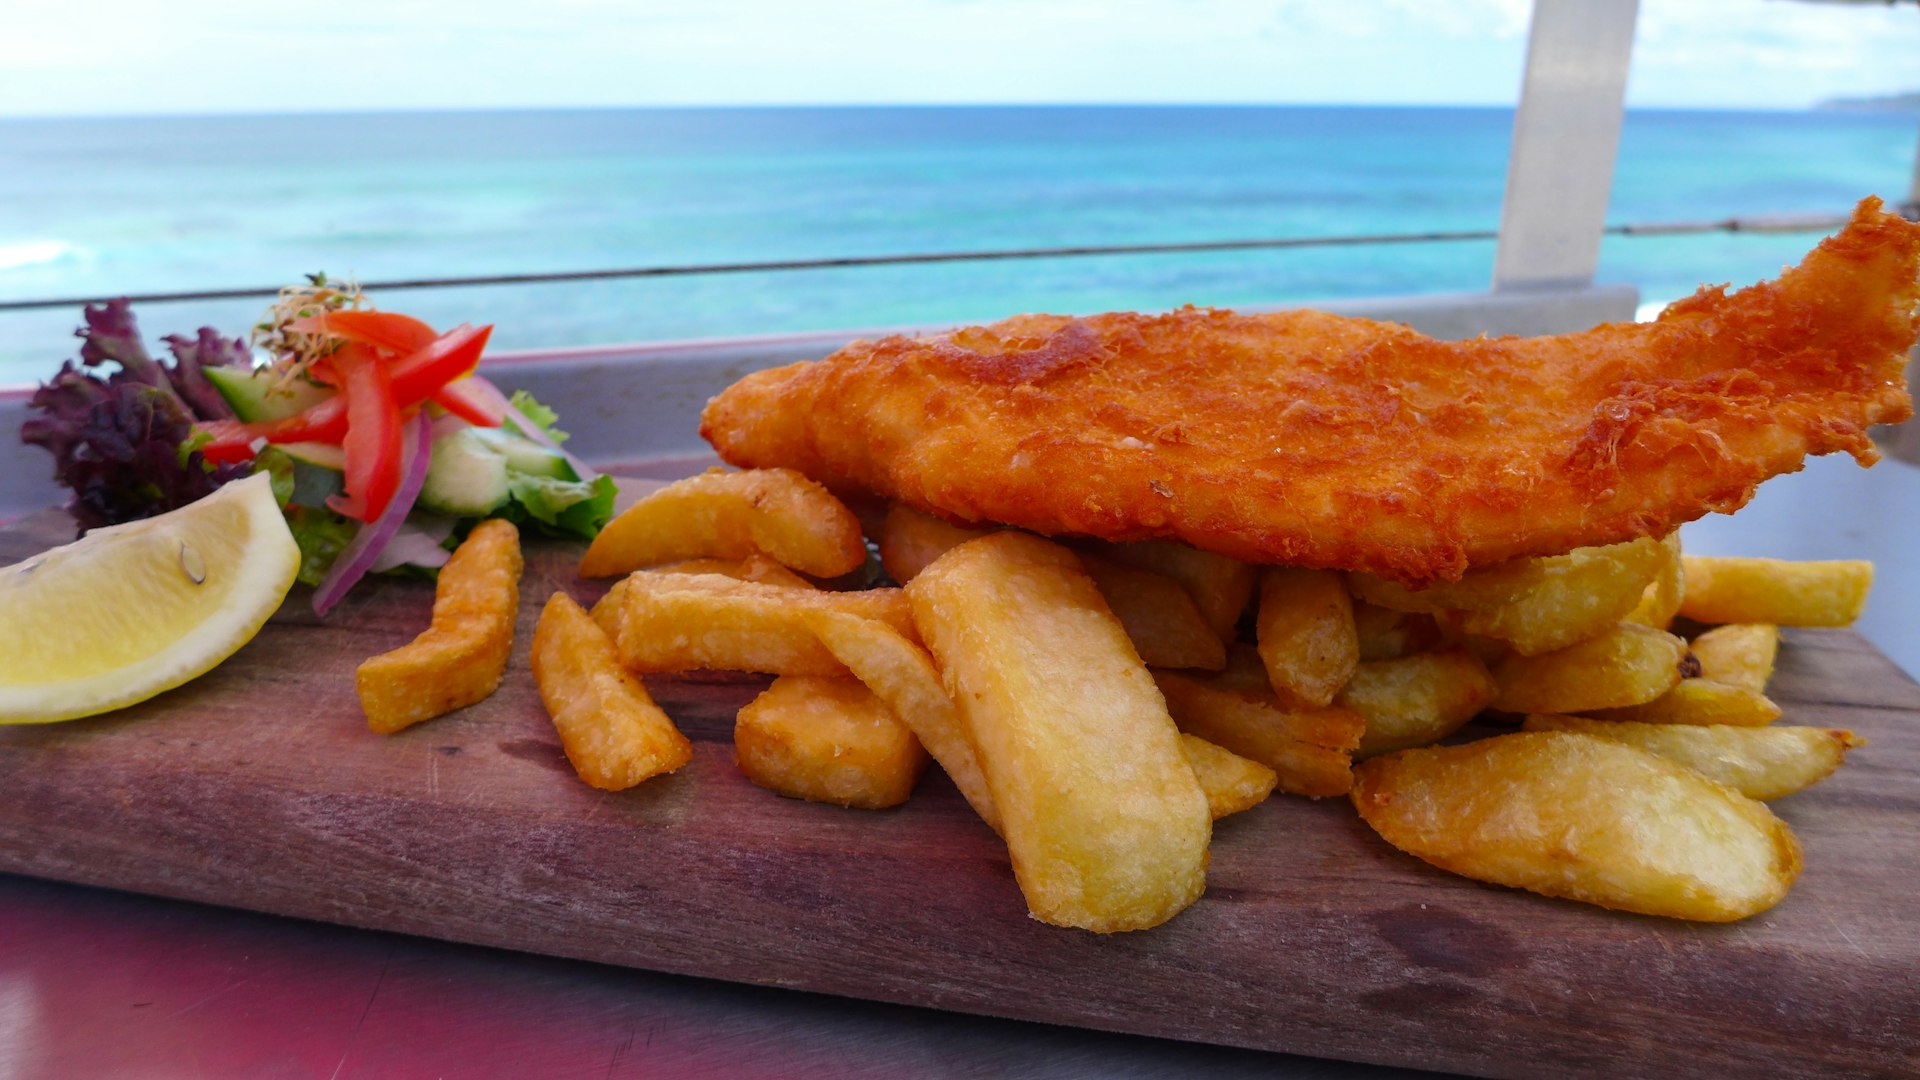 Sea views and fish with hand-cut chips. Image by Benedict Walker / Lonely Planet